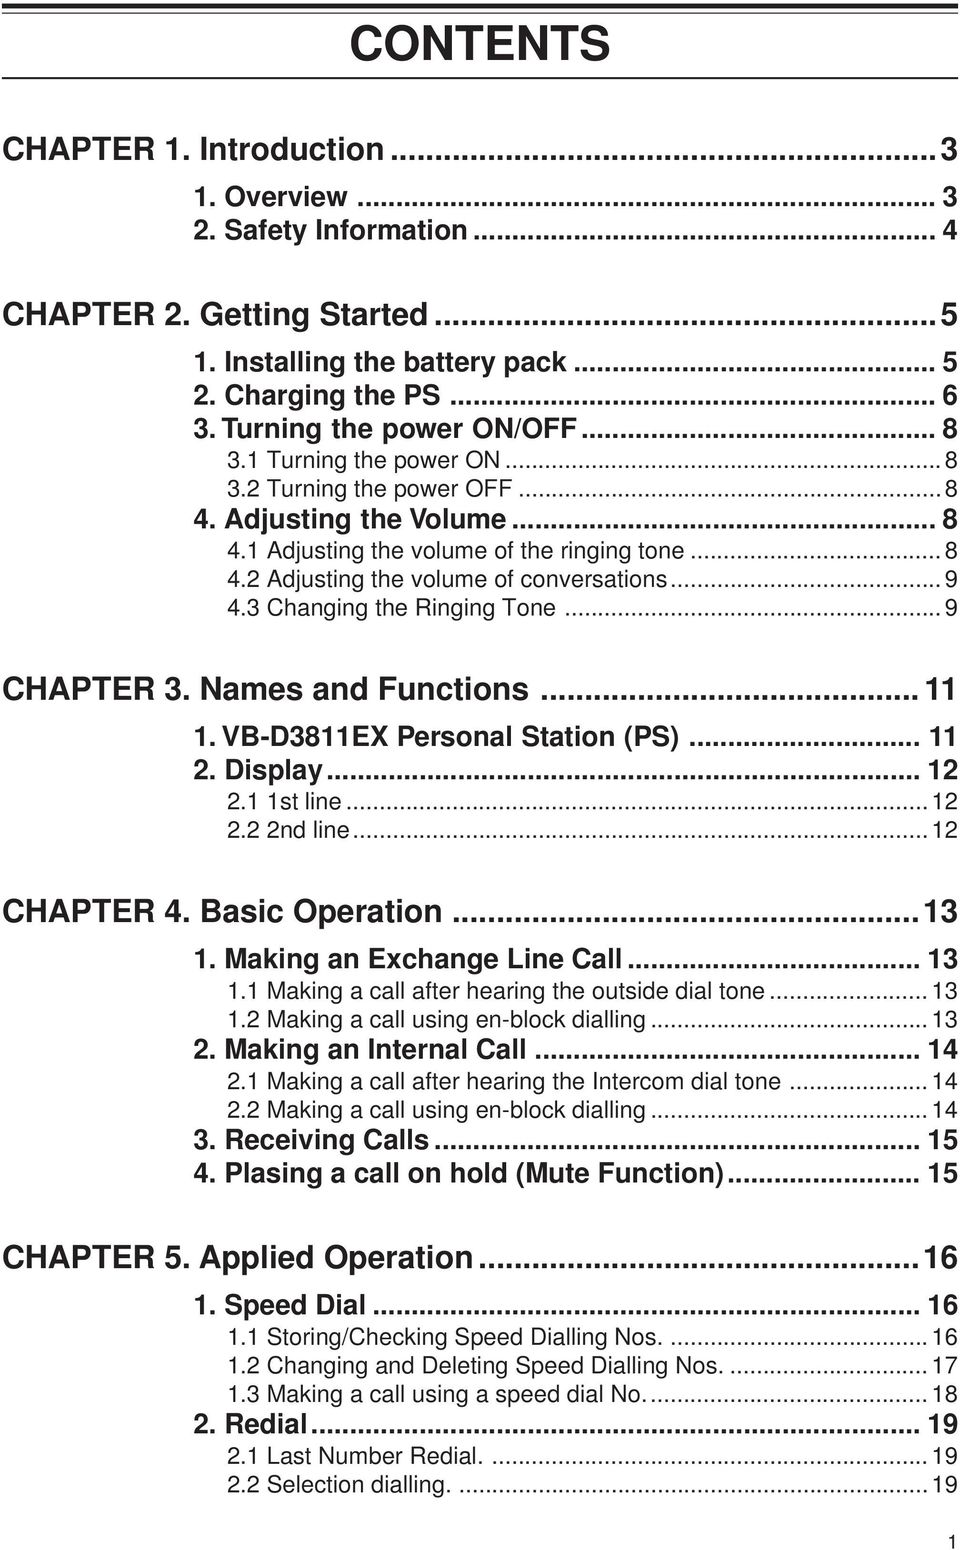 3 Changing the Ringing Tone... 9 CHAPTER 3. Names and Functions... 11 1. VB-D3811EX Personal Station (PS)... 11 2. Display... 12 2.1 1st line... 12 2.2 2nd line... 12 CHAPTER 4. Basic Operation...13 1.